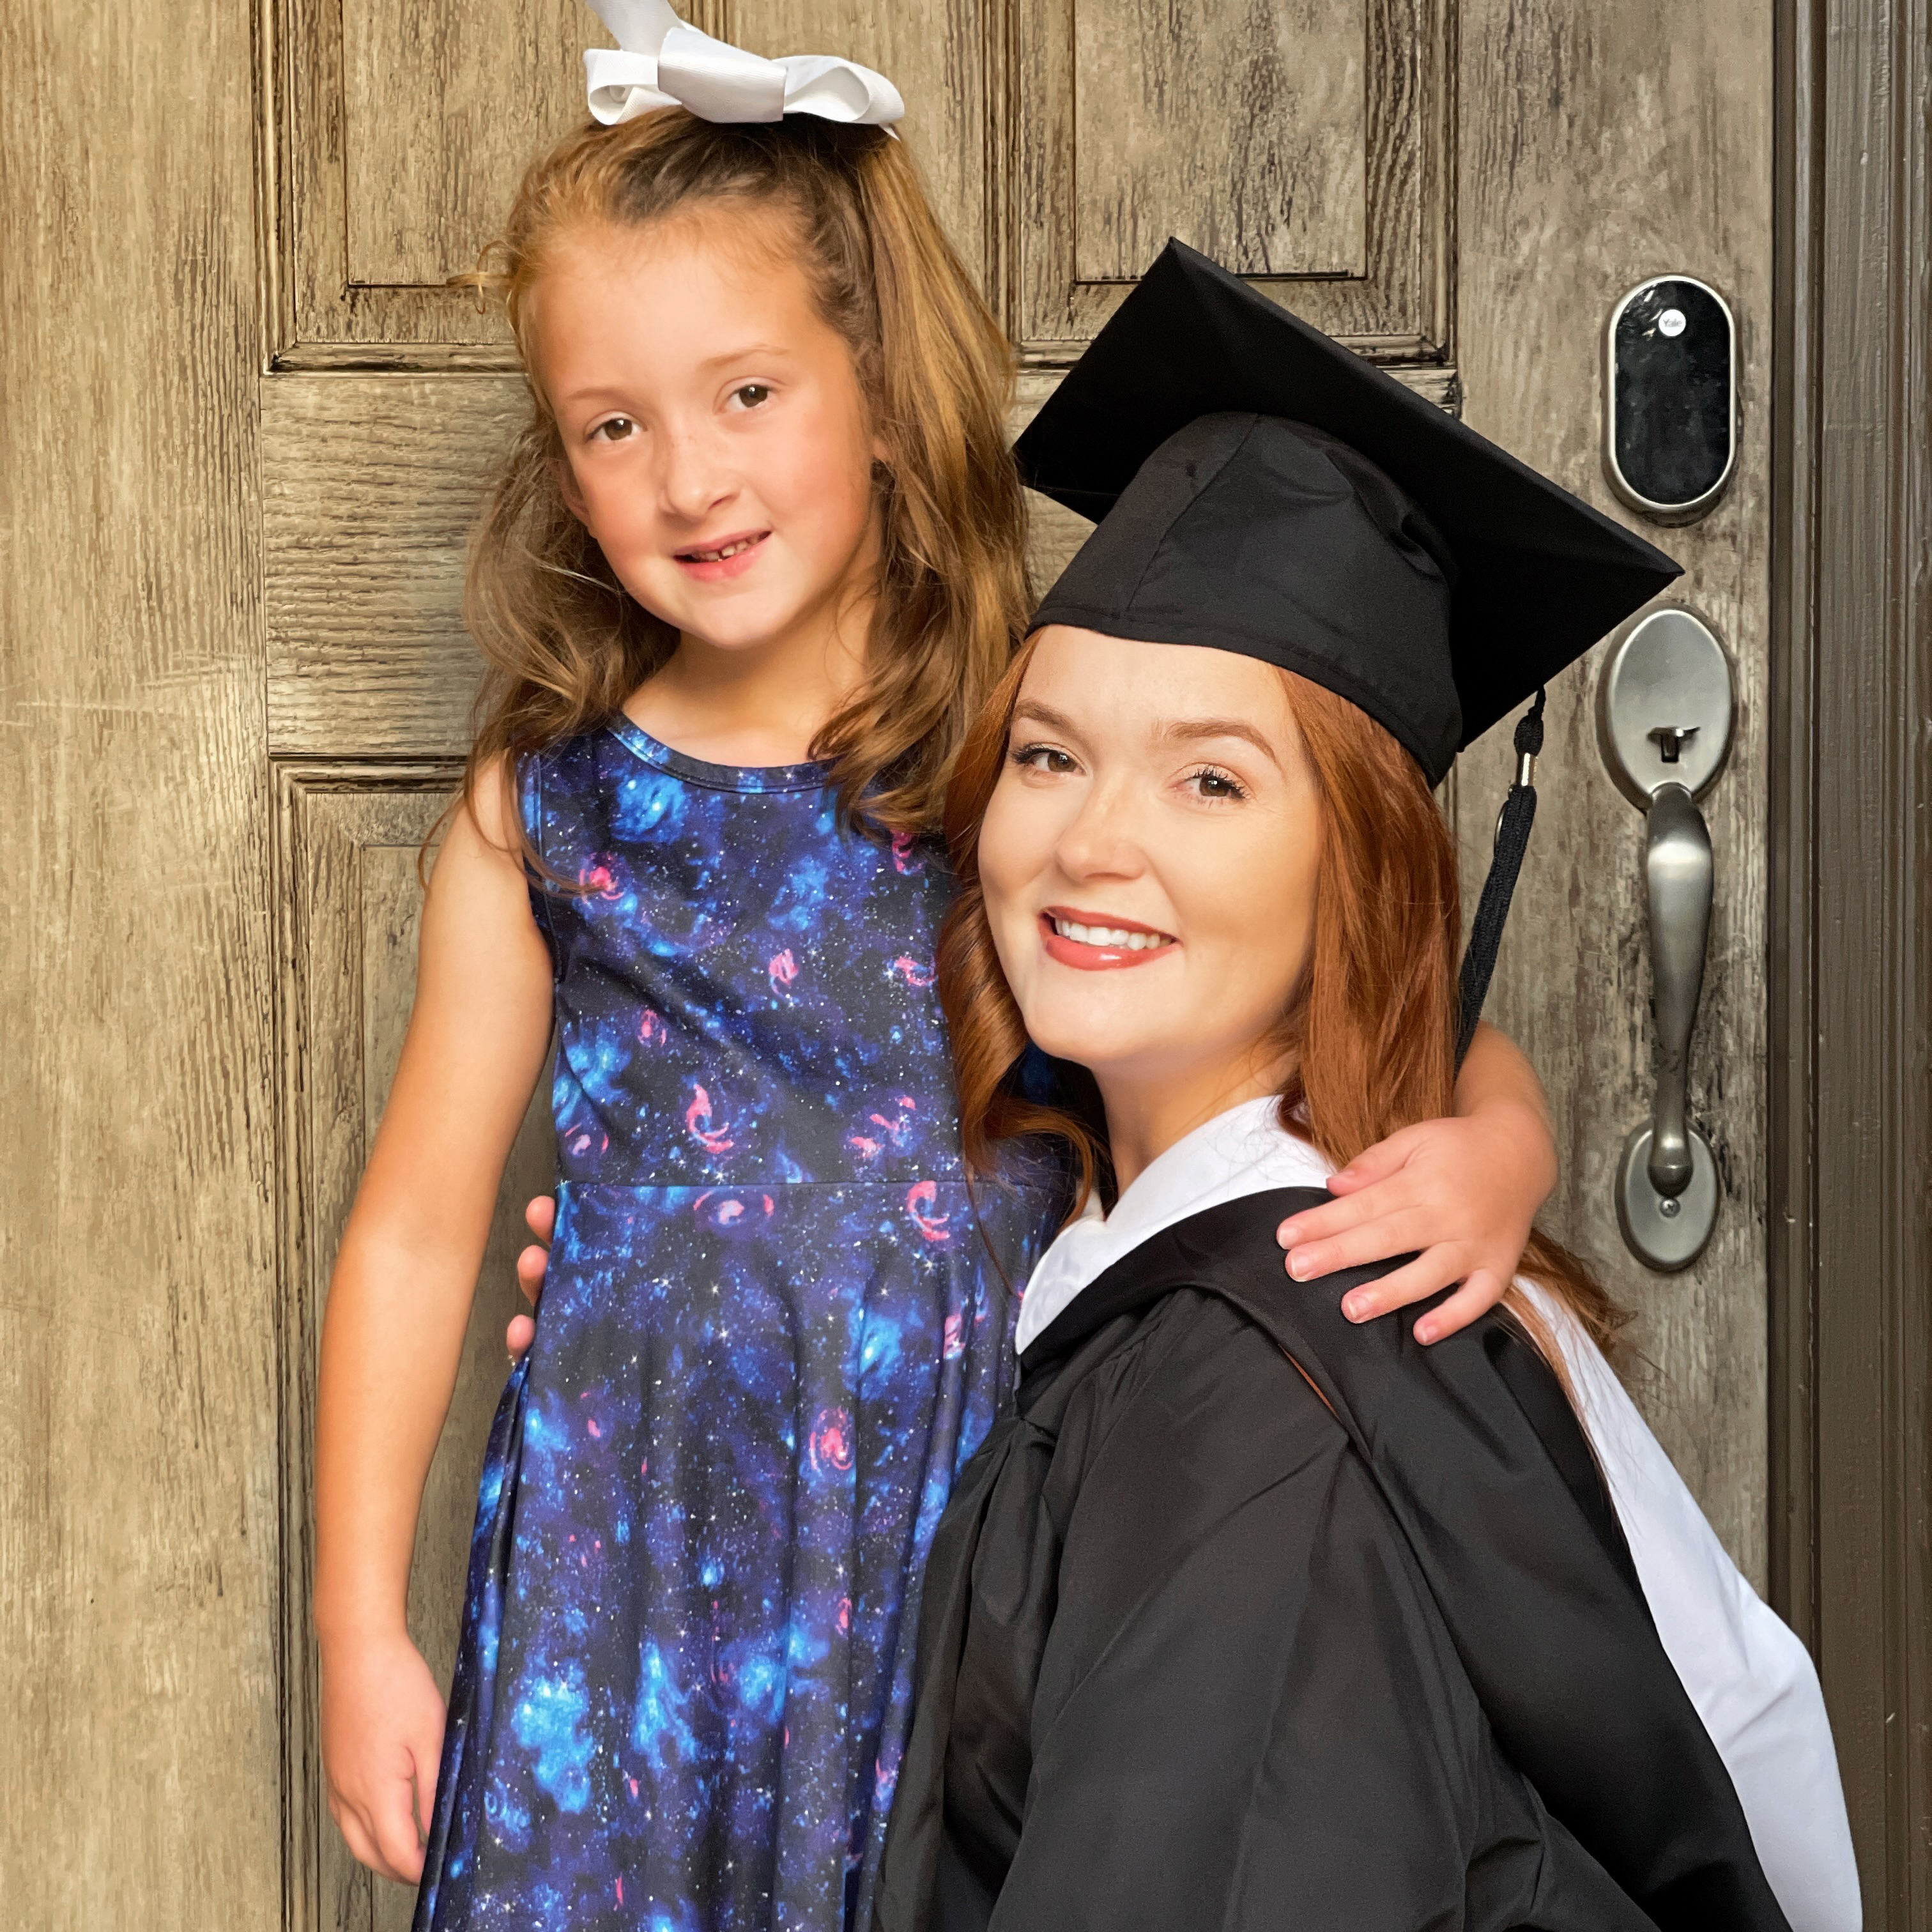 Anne posing with her daughter in her cap and gown..